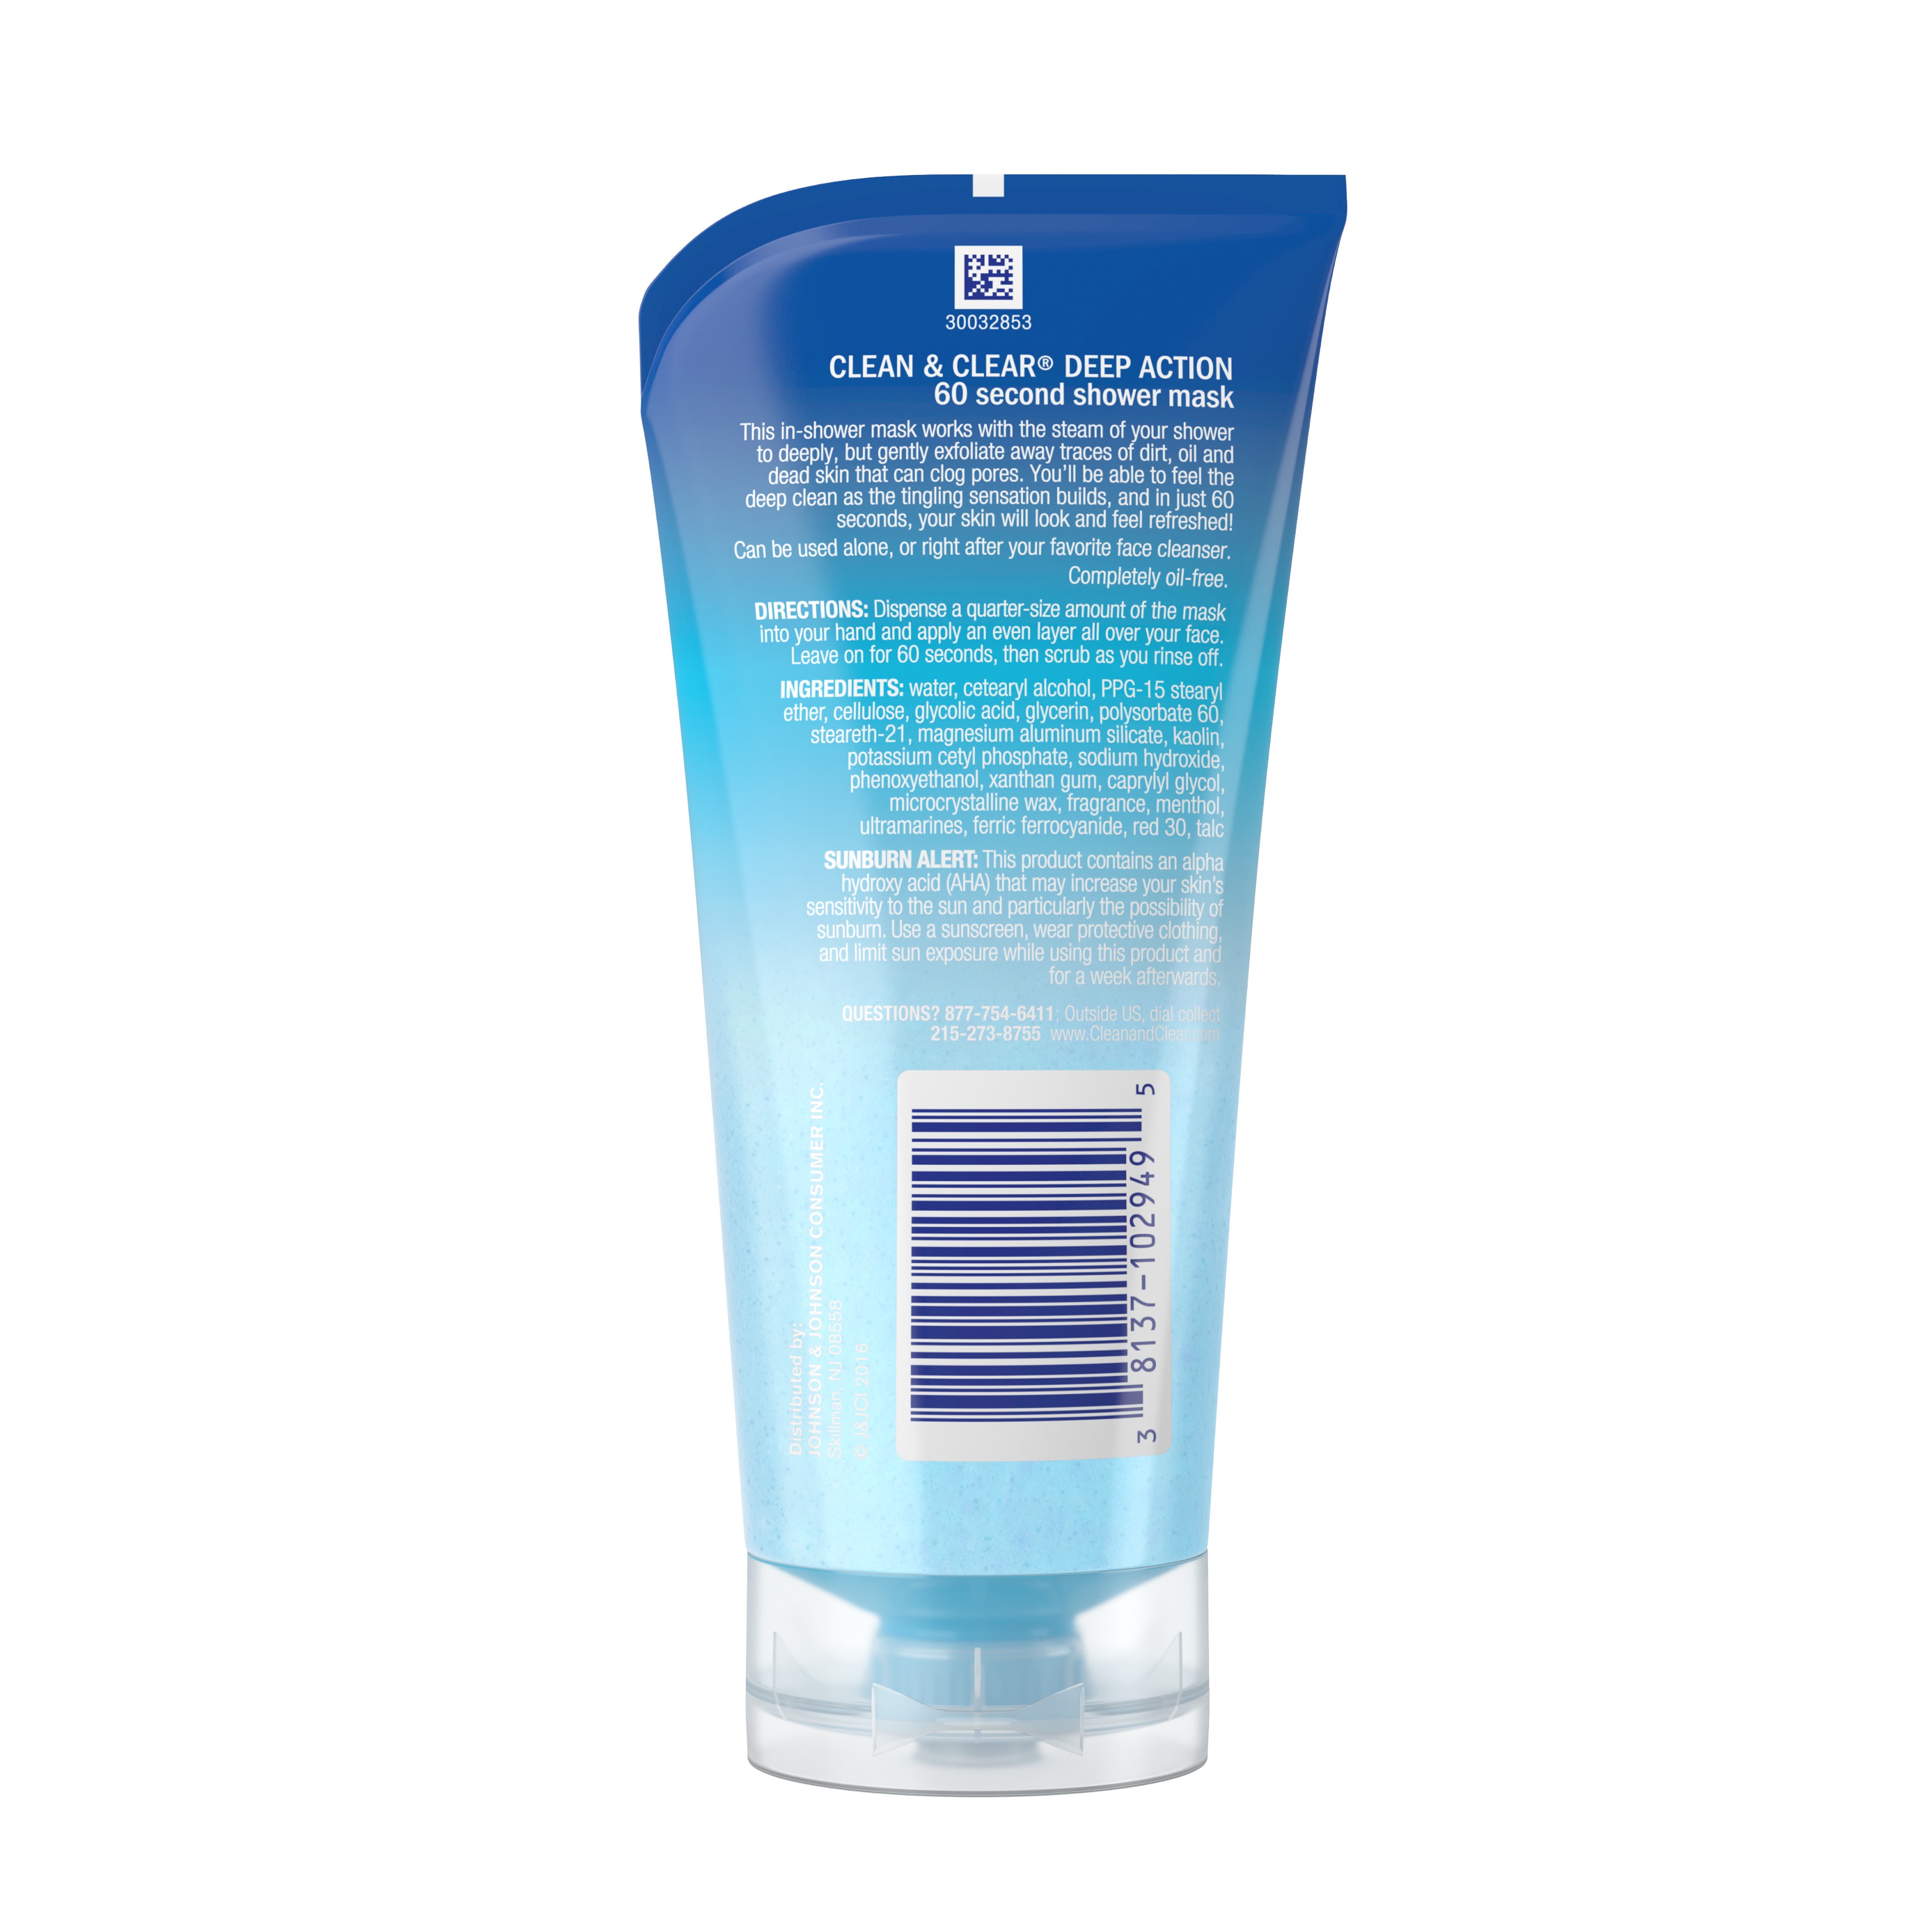 Clean & Clear Deep Action Exfoliating 60-Second Shower Face Mask, 5 oz - image 3 of 9